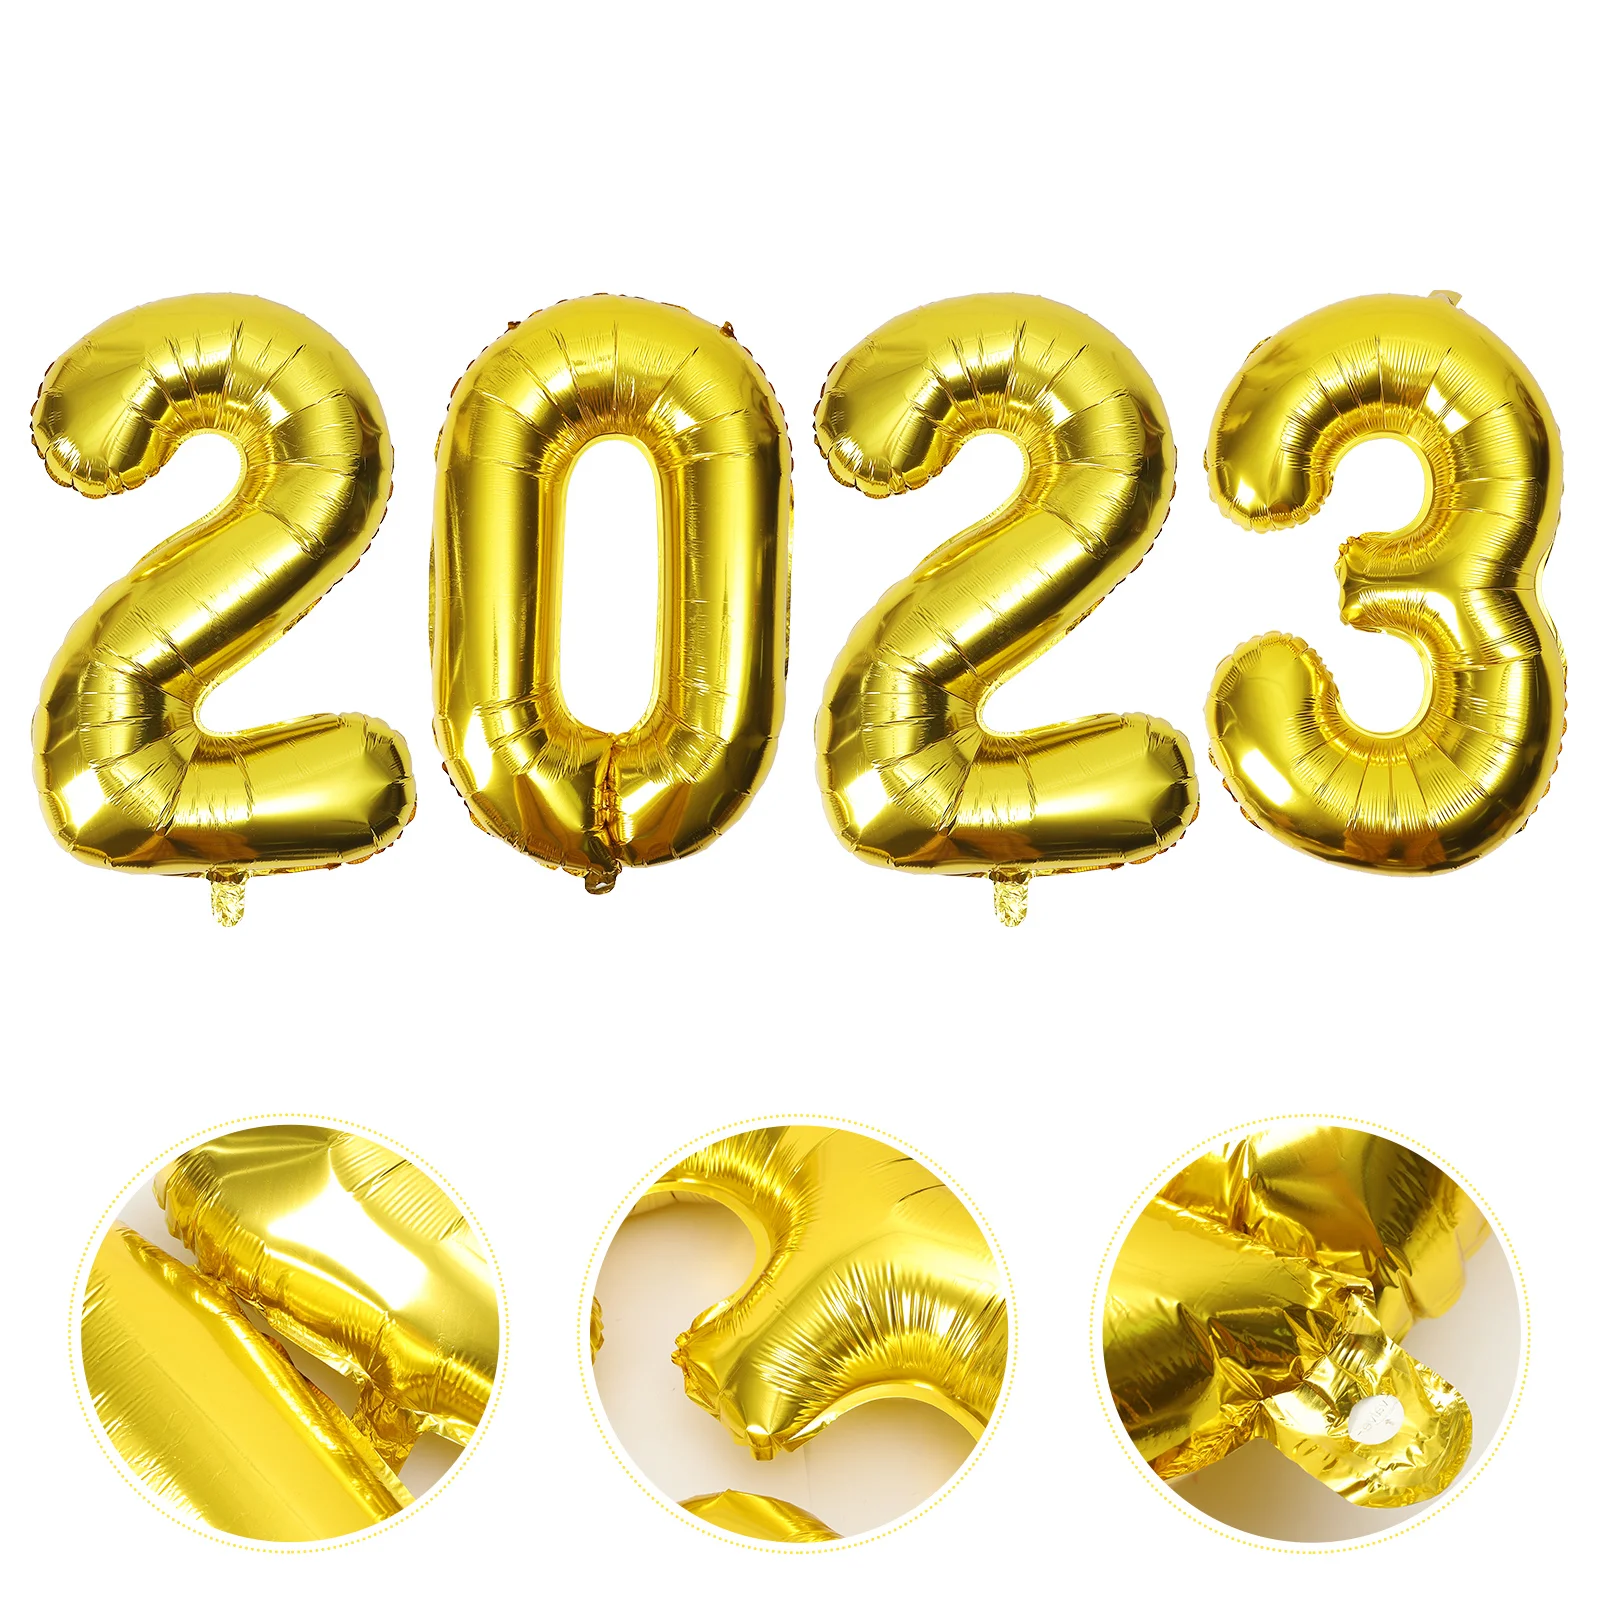 

Balloons Balloon Number New Year Partybirthday Eve Years Graduation Happy Helium Gold Decor Digitaldecorations Congrats Numbers